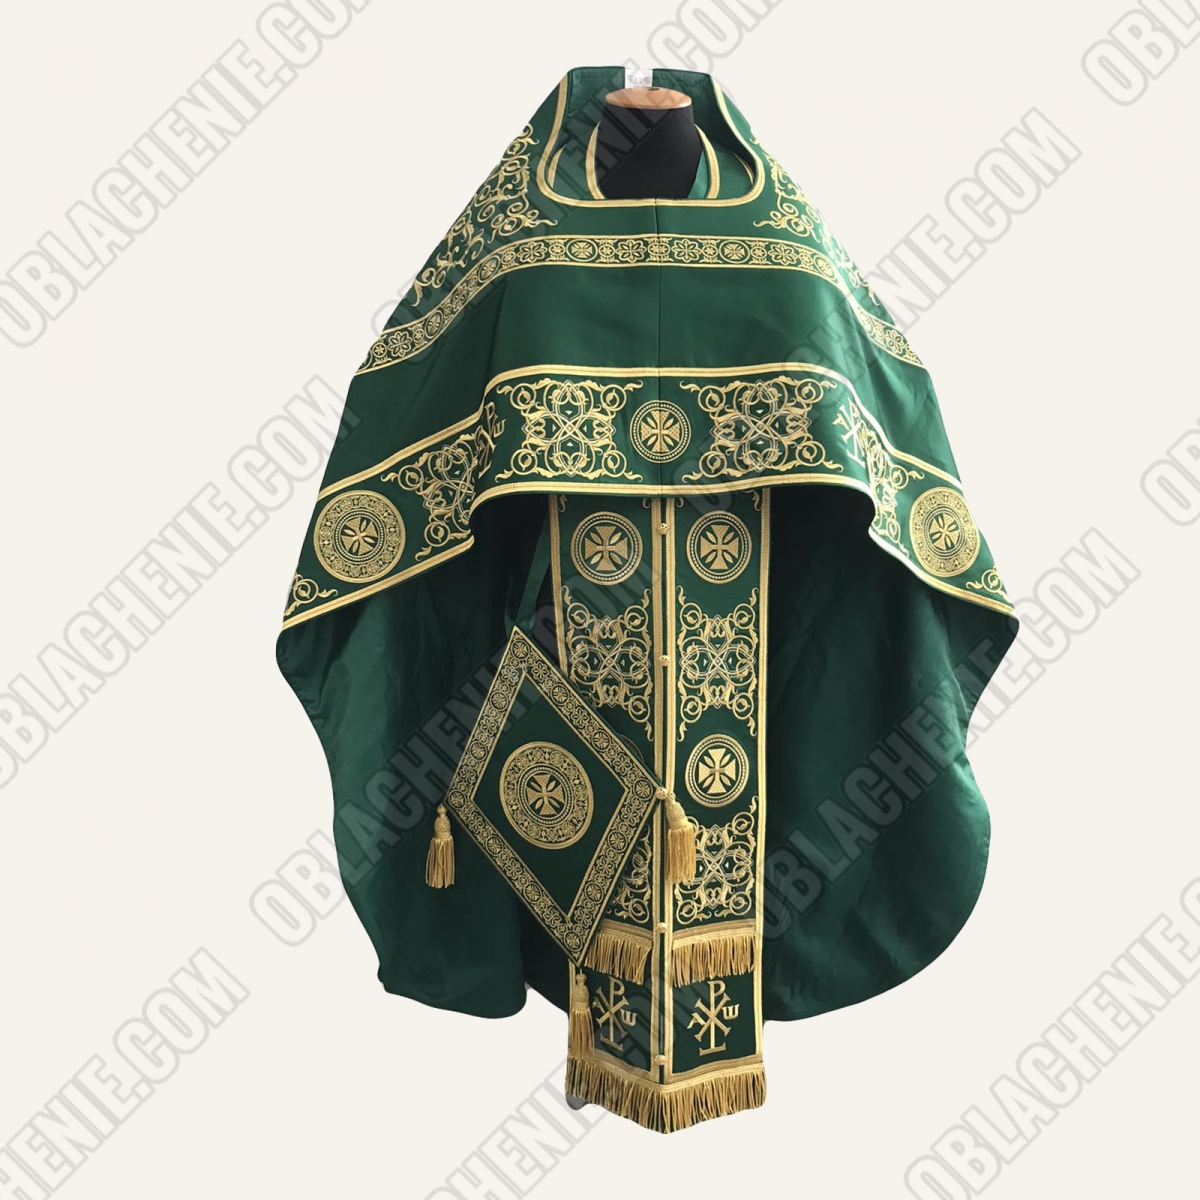 EMBROIDERED PRIEST'S VESTMENTS 11562